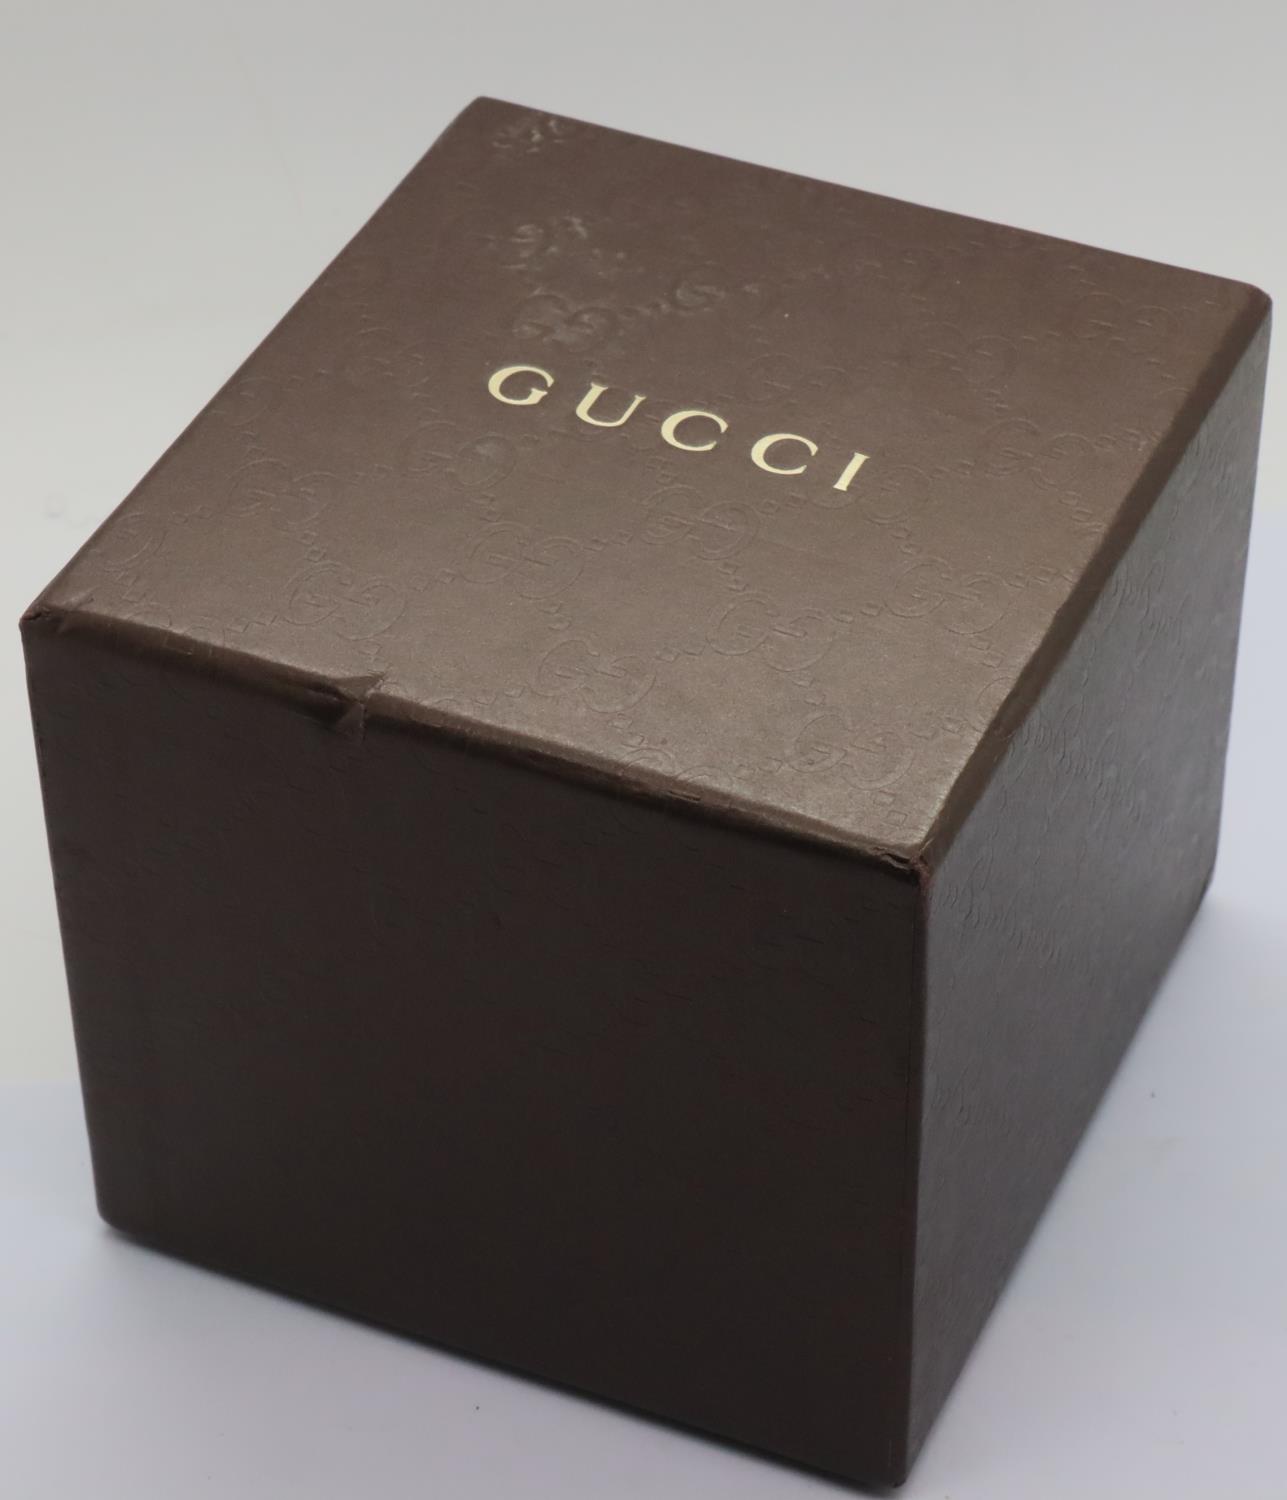 Gents Gucci chronograph wristwatch, having a black dial, stainless steel body and bracelet in - Image 5 of 5